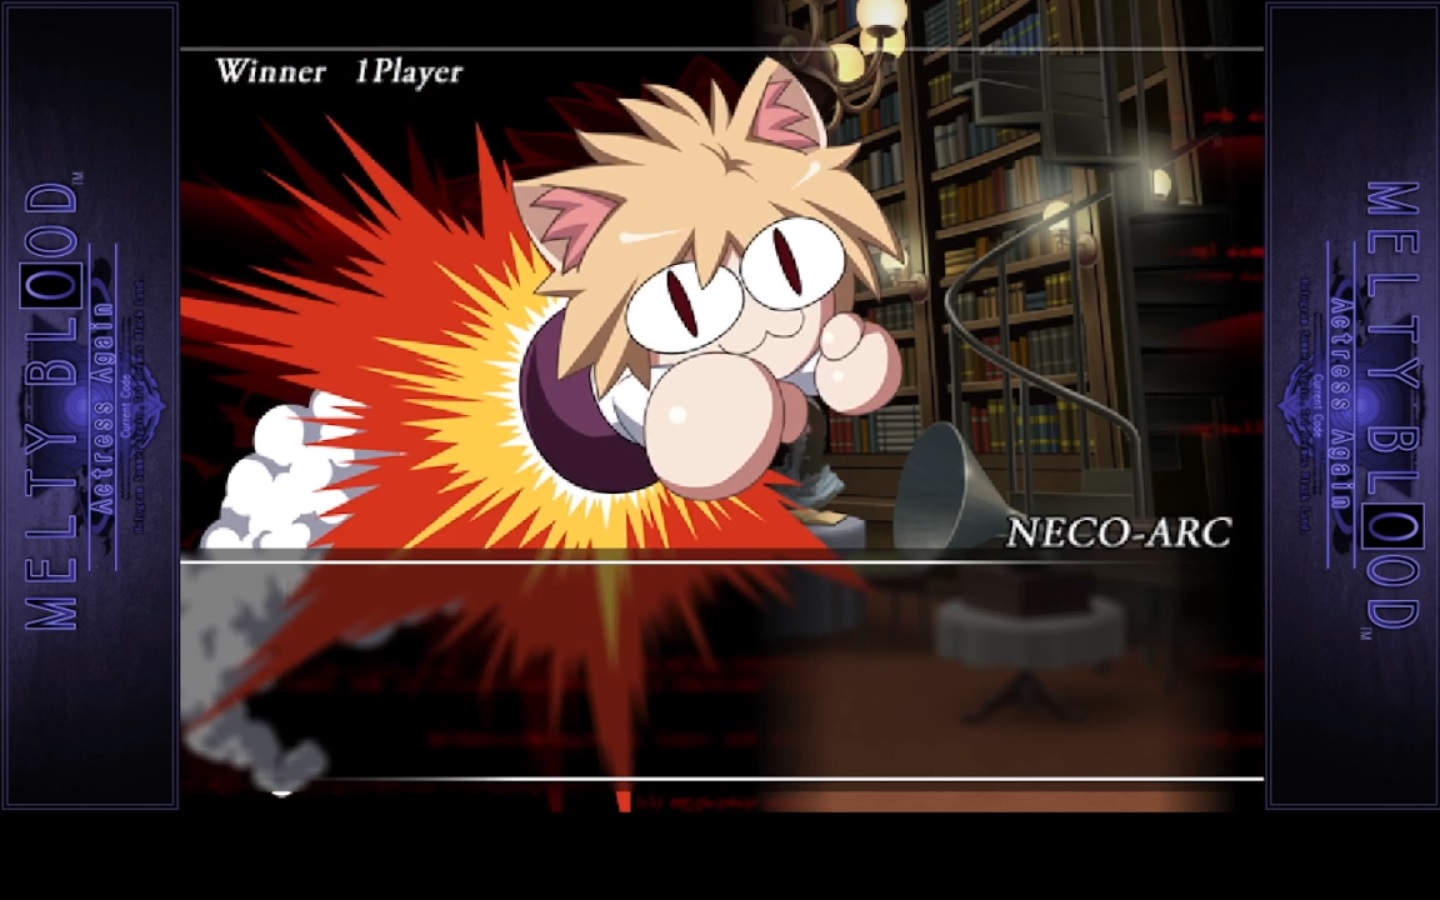 MELTY BLOOD Actress Again Current Code.Neco Arc vs White Len [ネコアルクVS白レン]